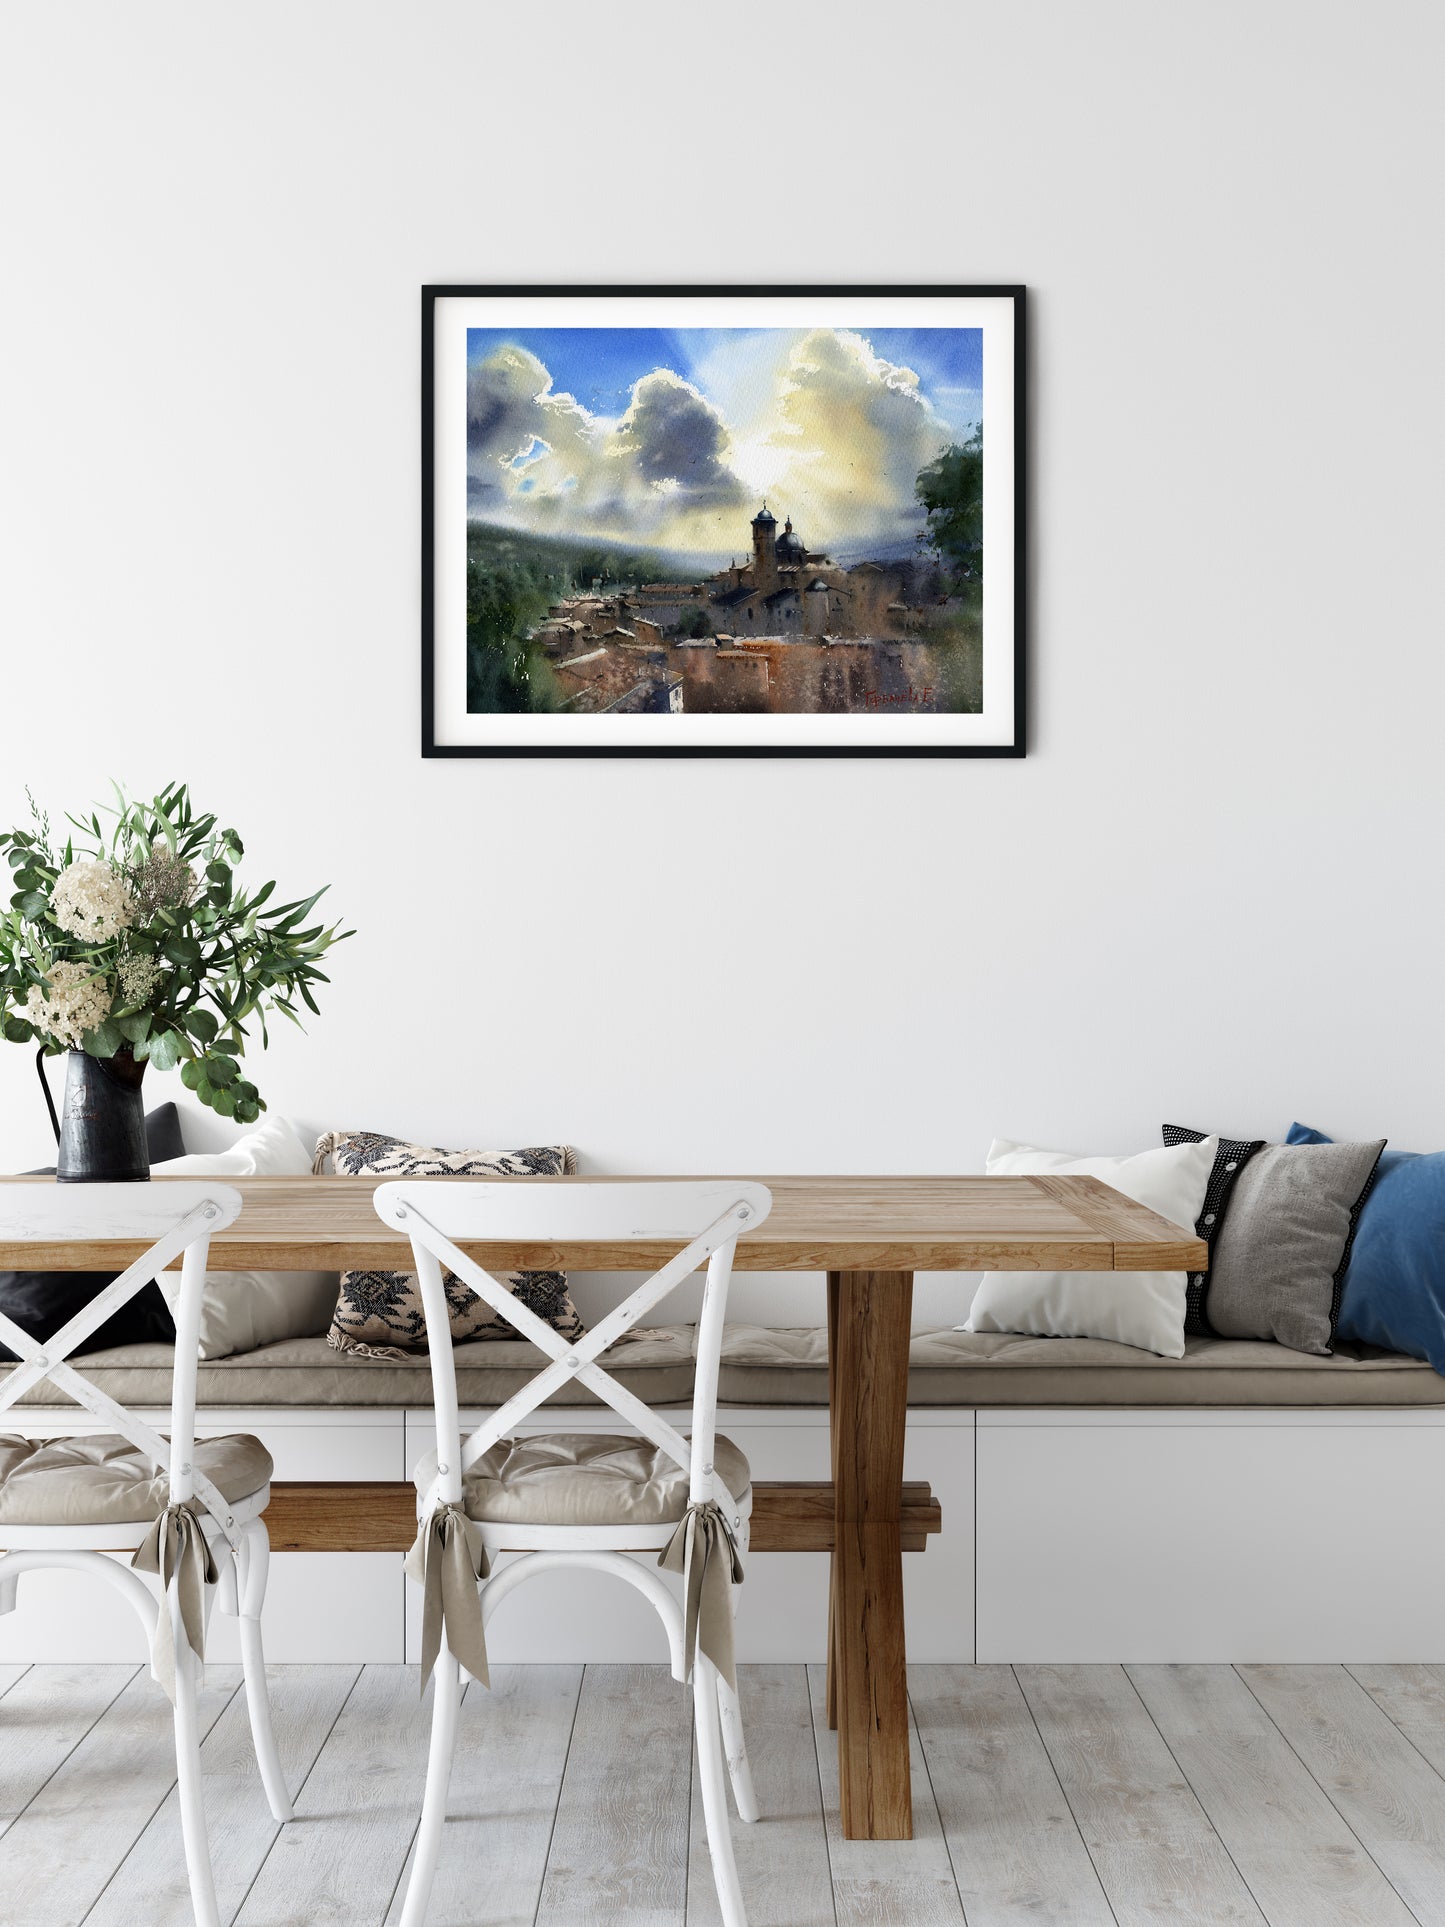 Fabriano Skyline Watercolor Painting Print - Italy Cityscape Artwork